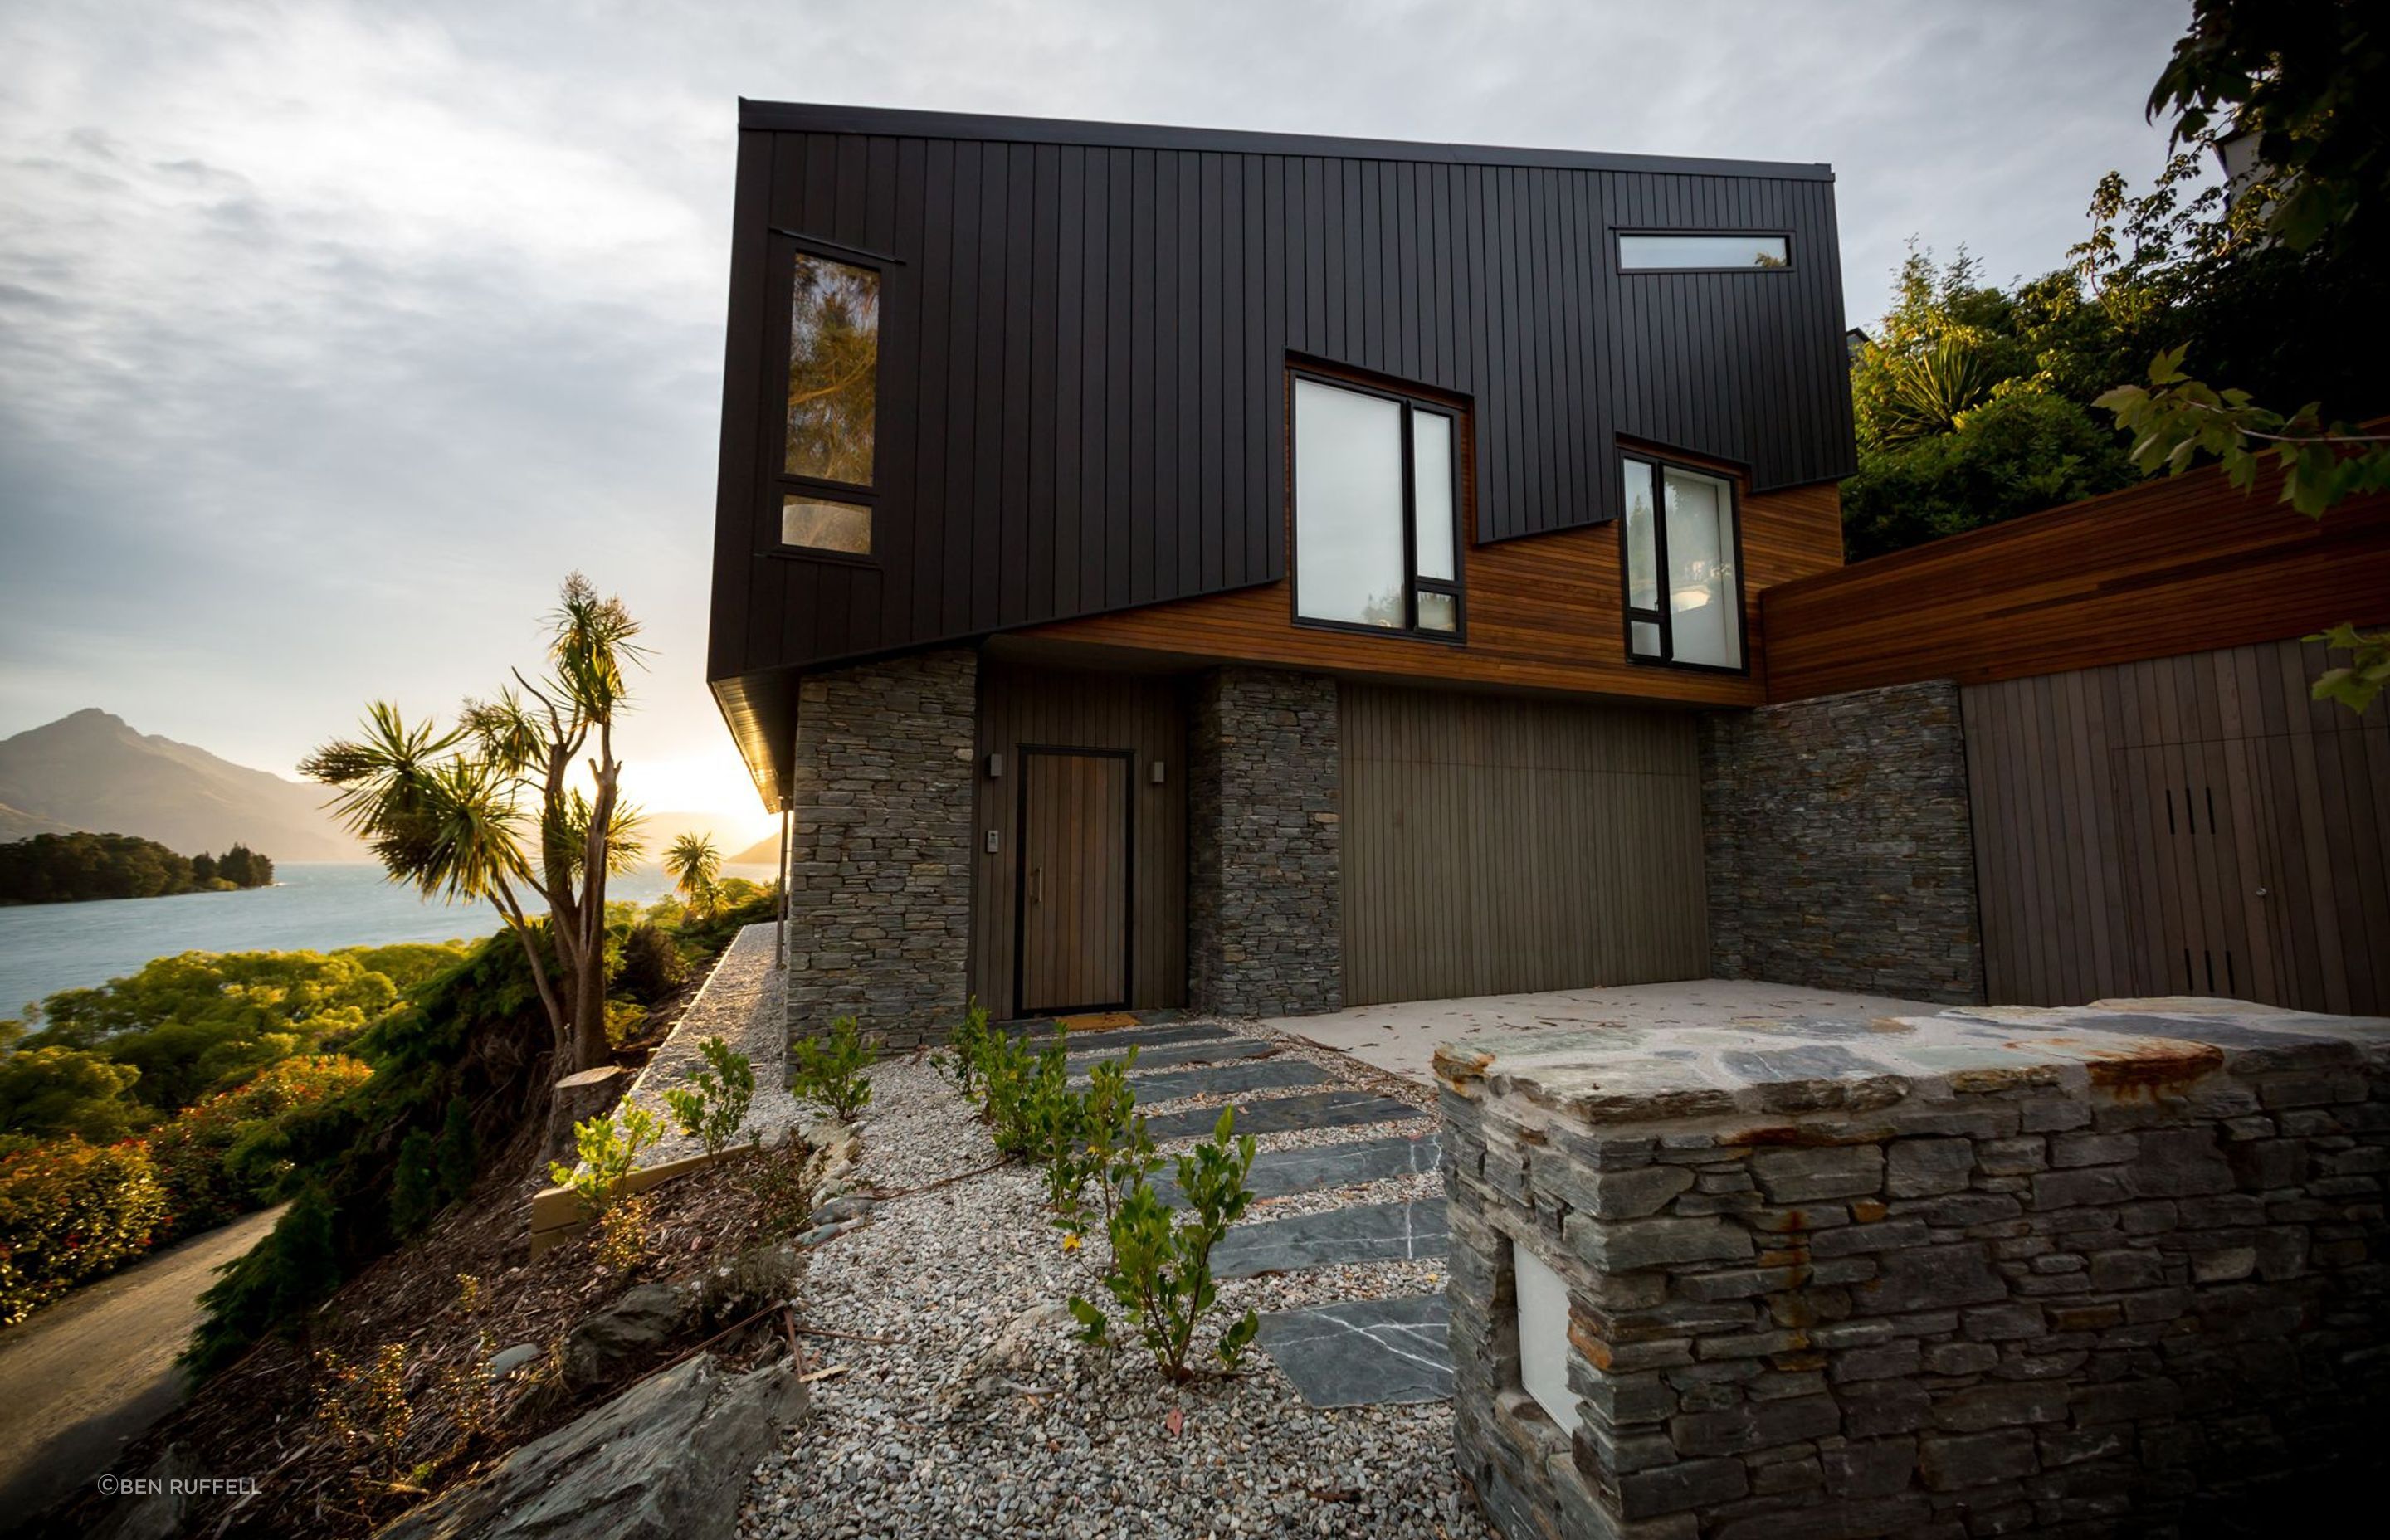 Schist cladding on the lower level helps anchor the house to the site while cedar and aluminium cladding was used to explore the tilt and shift of the topography.